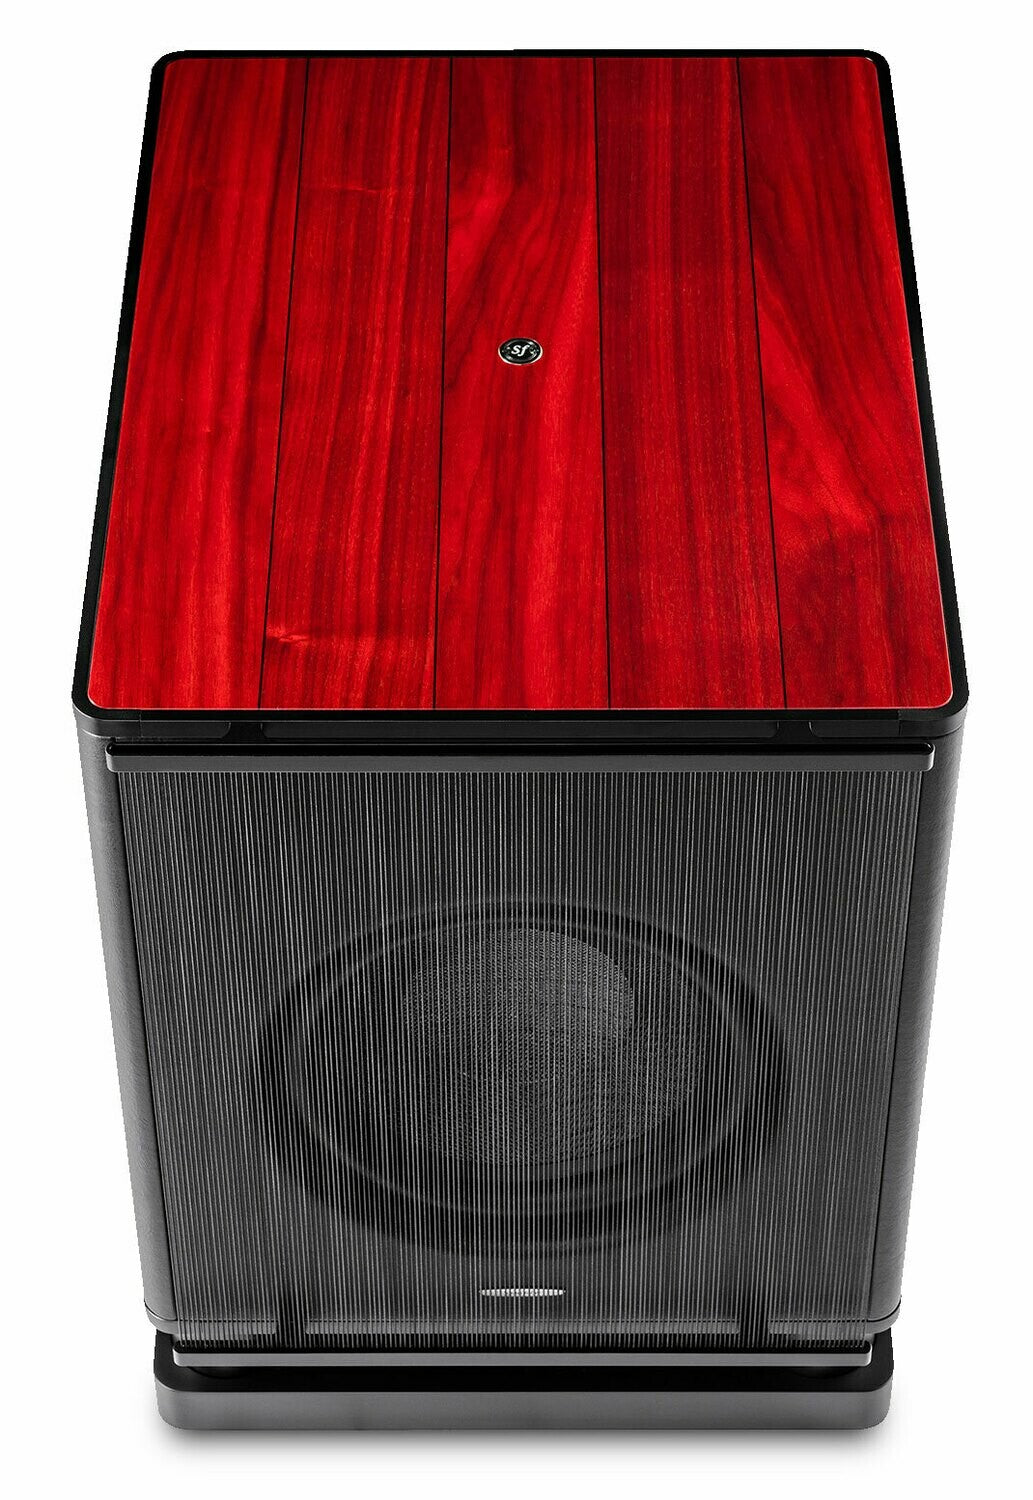 Sonus Faber Gravis III/V/VI Subwoofer (Please call/In-Store Only) - Audio Excellence - {{{{ product.product_type }} - Sonus Faber